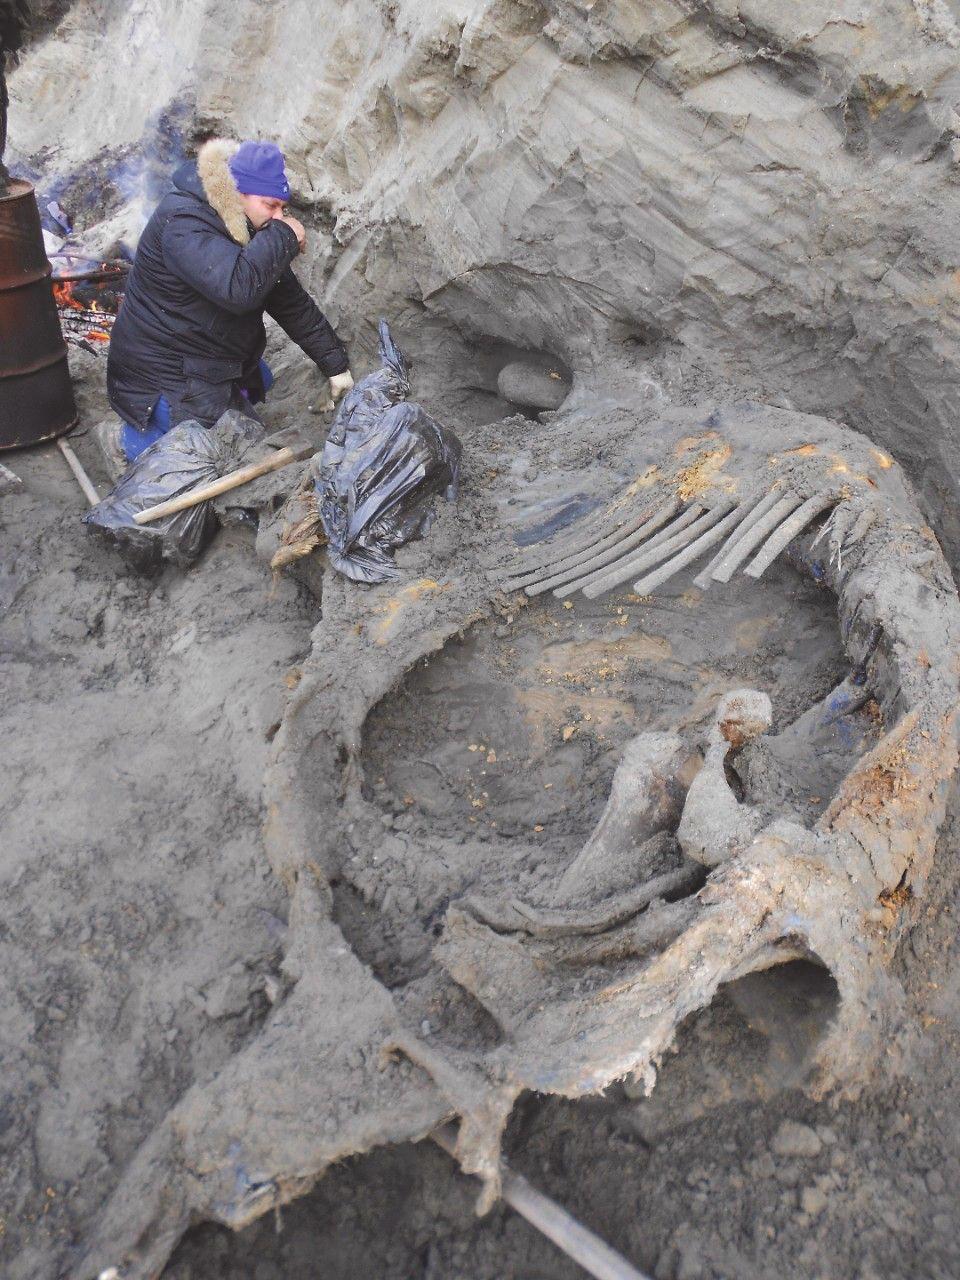 in Arctic 2, had a photo of the scientist who excavated the mammoth carcass (Figure 1).